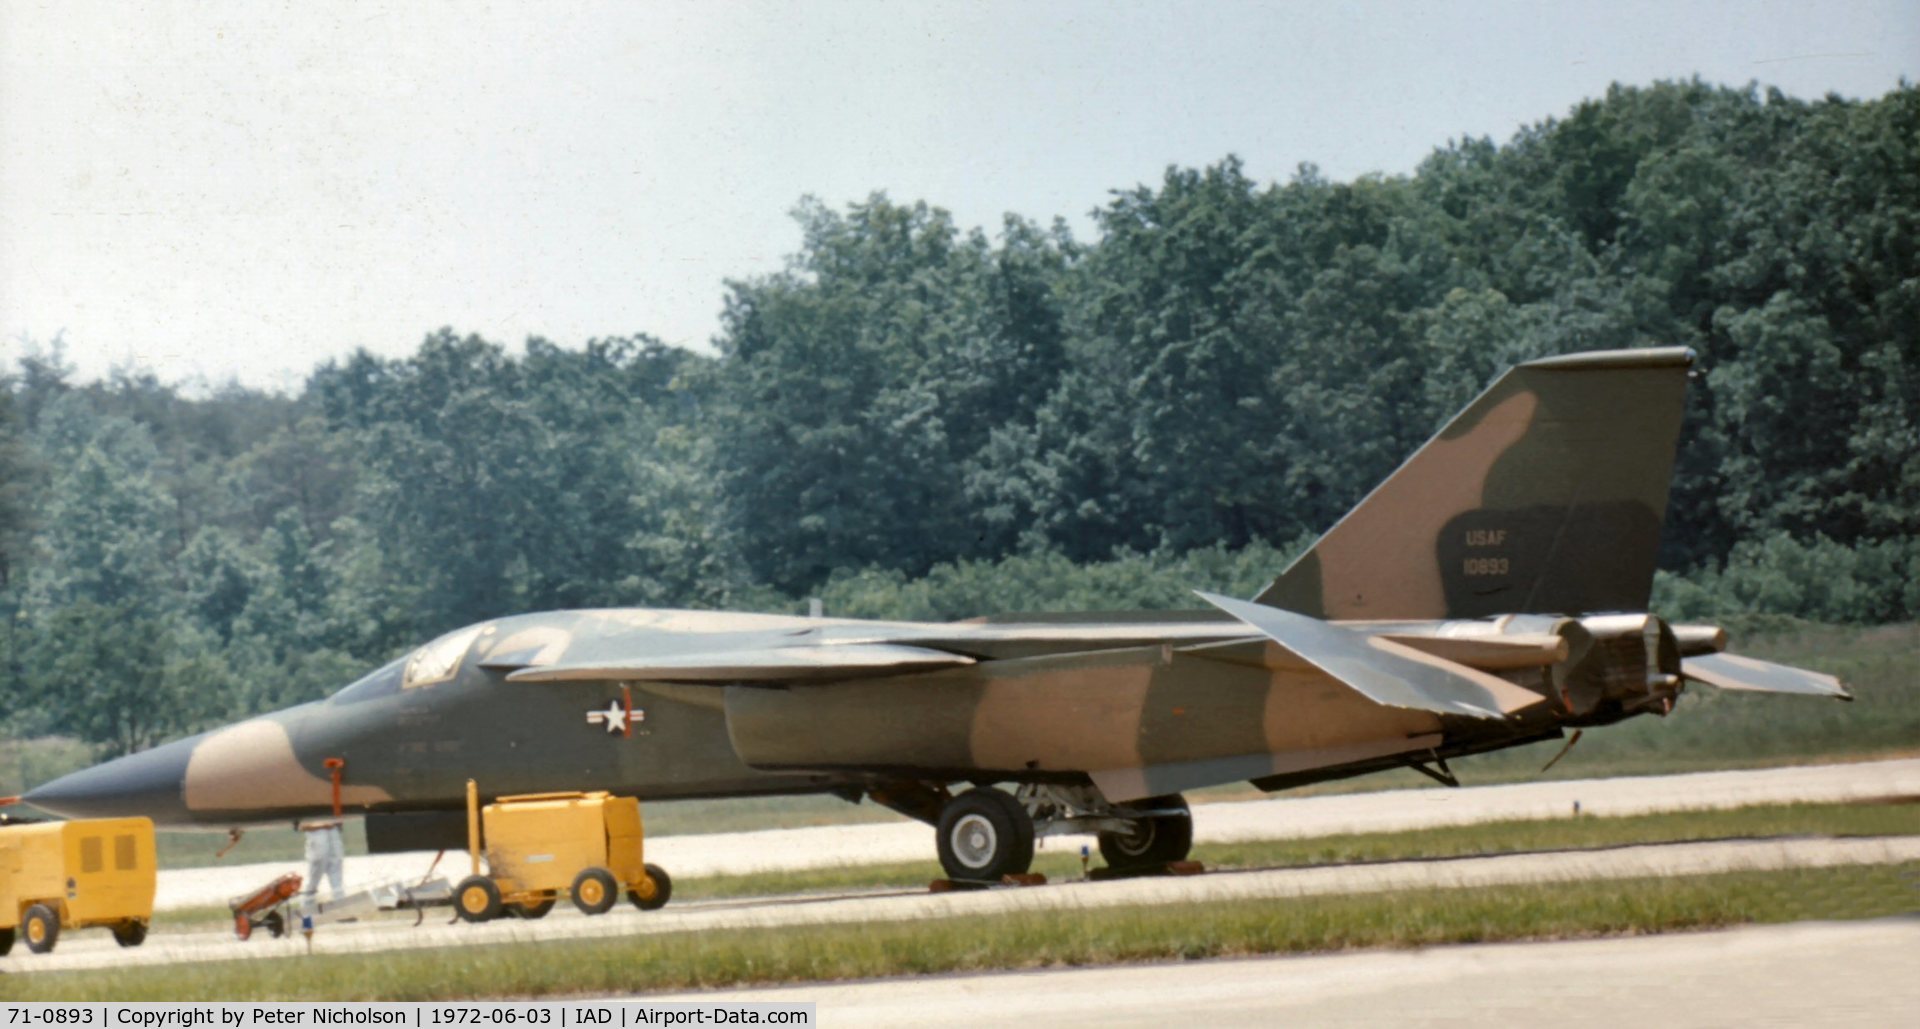 71-0893, 1971 General Dynamics F-111F Aardvark C/N E2-69, Flown at Transpo 72 at Dulles Airport was this F-111F without any unit markings - later known to have served with 48th TFW at RAF Lakenheath.